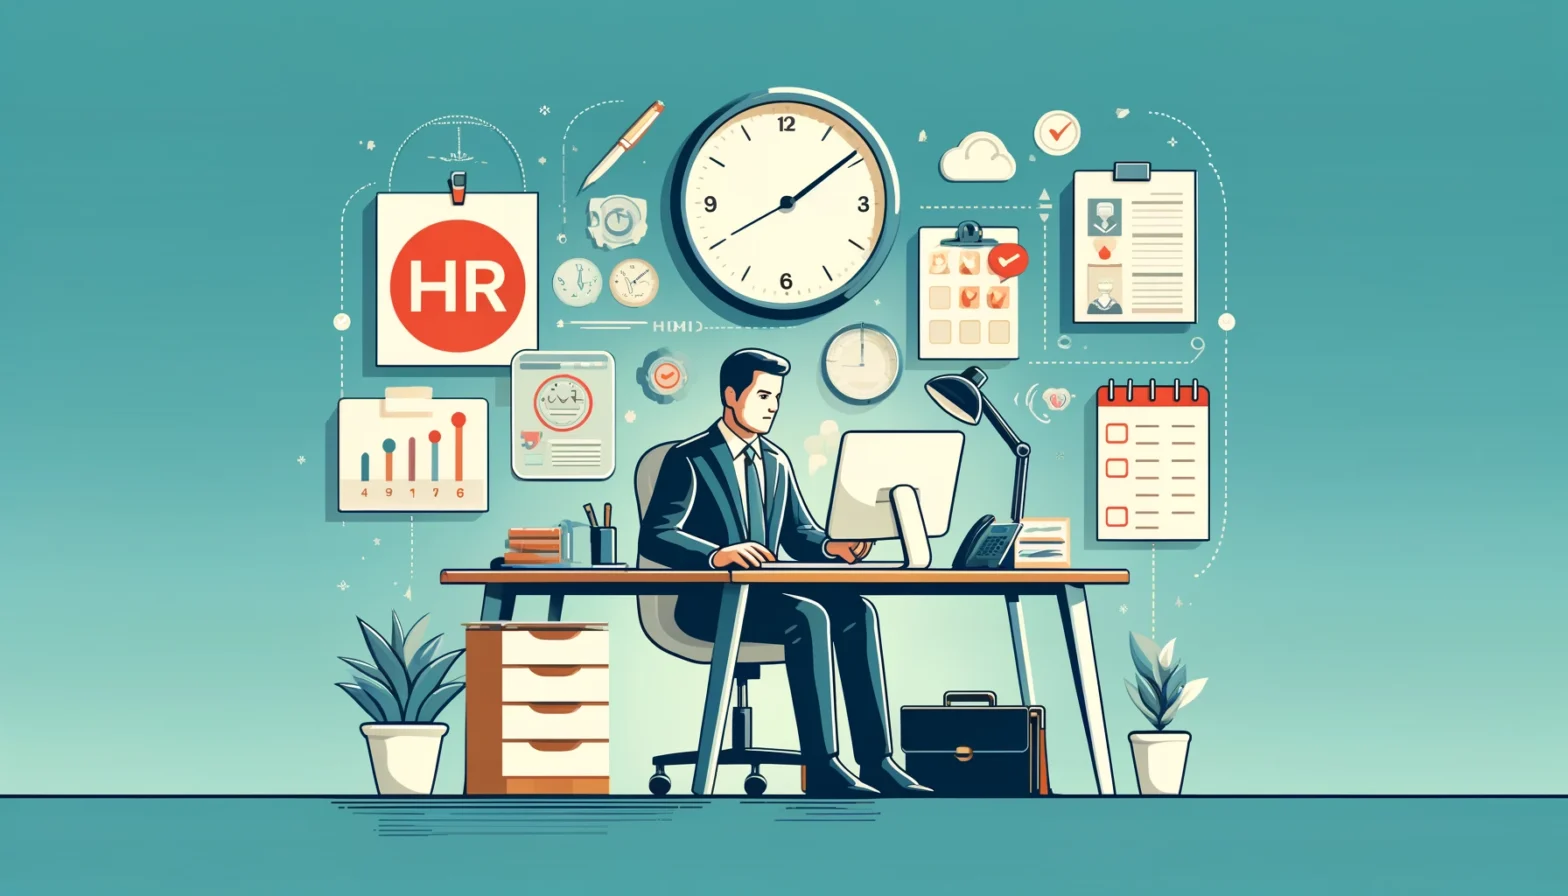 Keeping pace with the evolution of HR